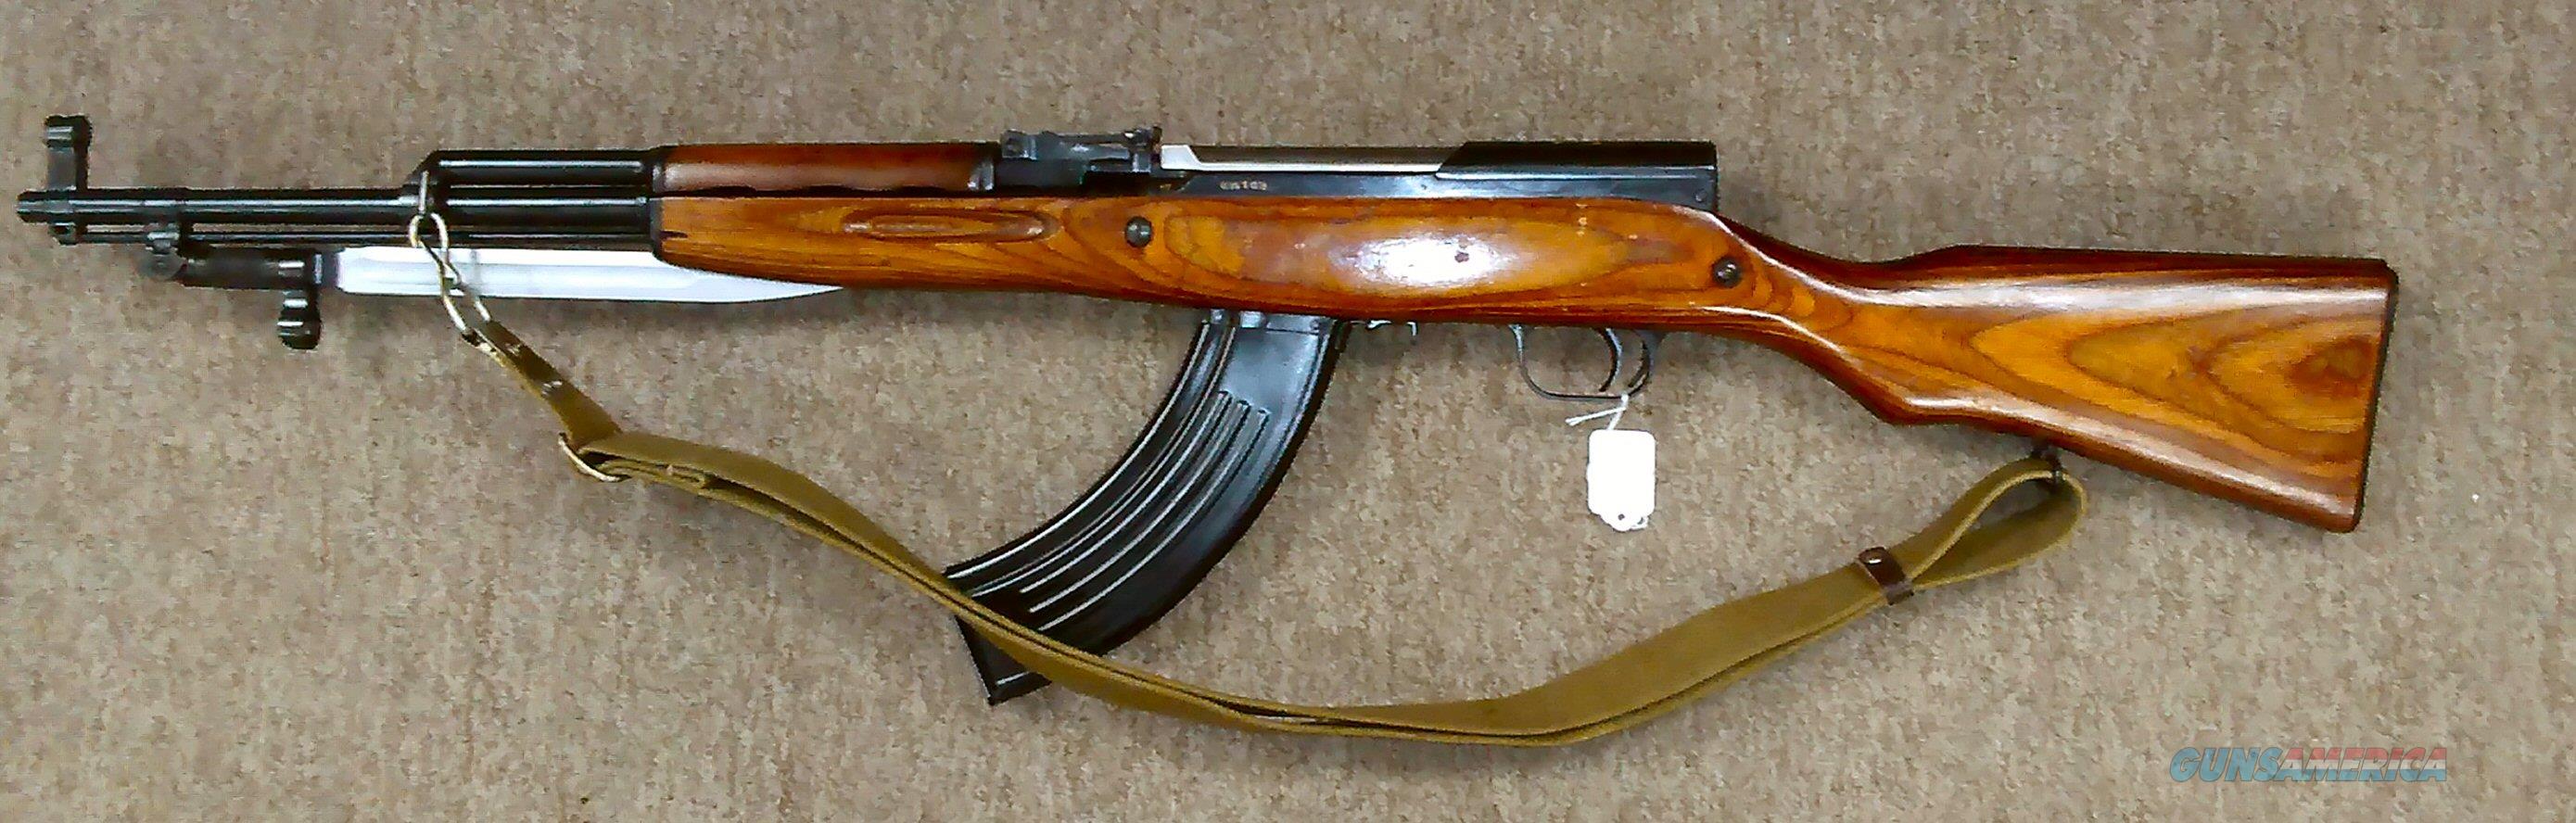 russian sks serial number identification